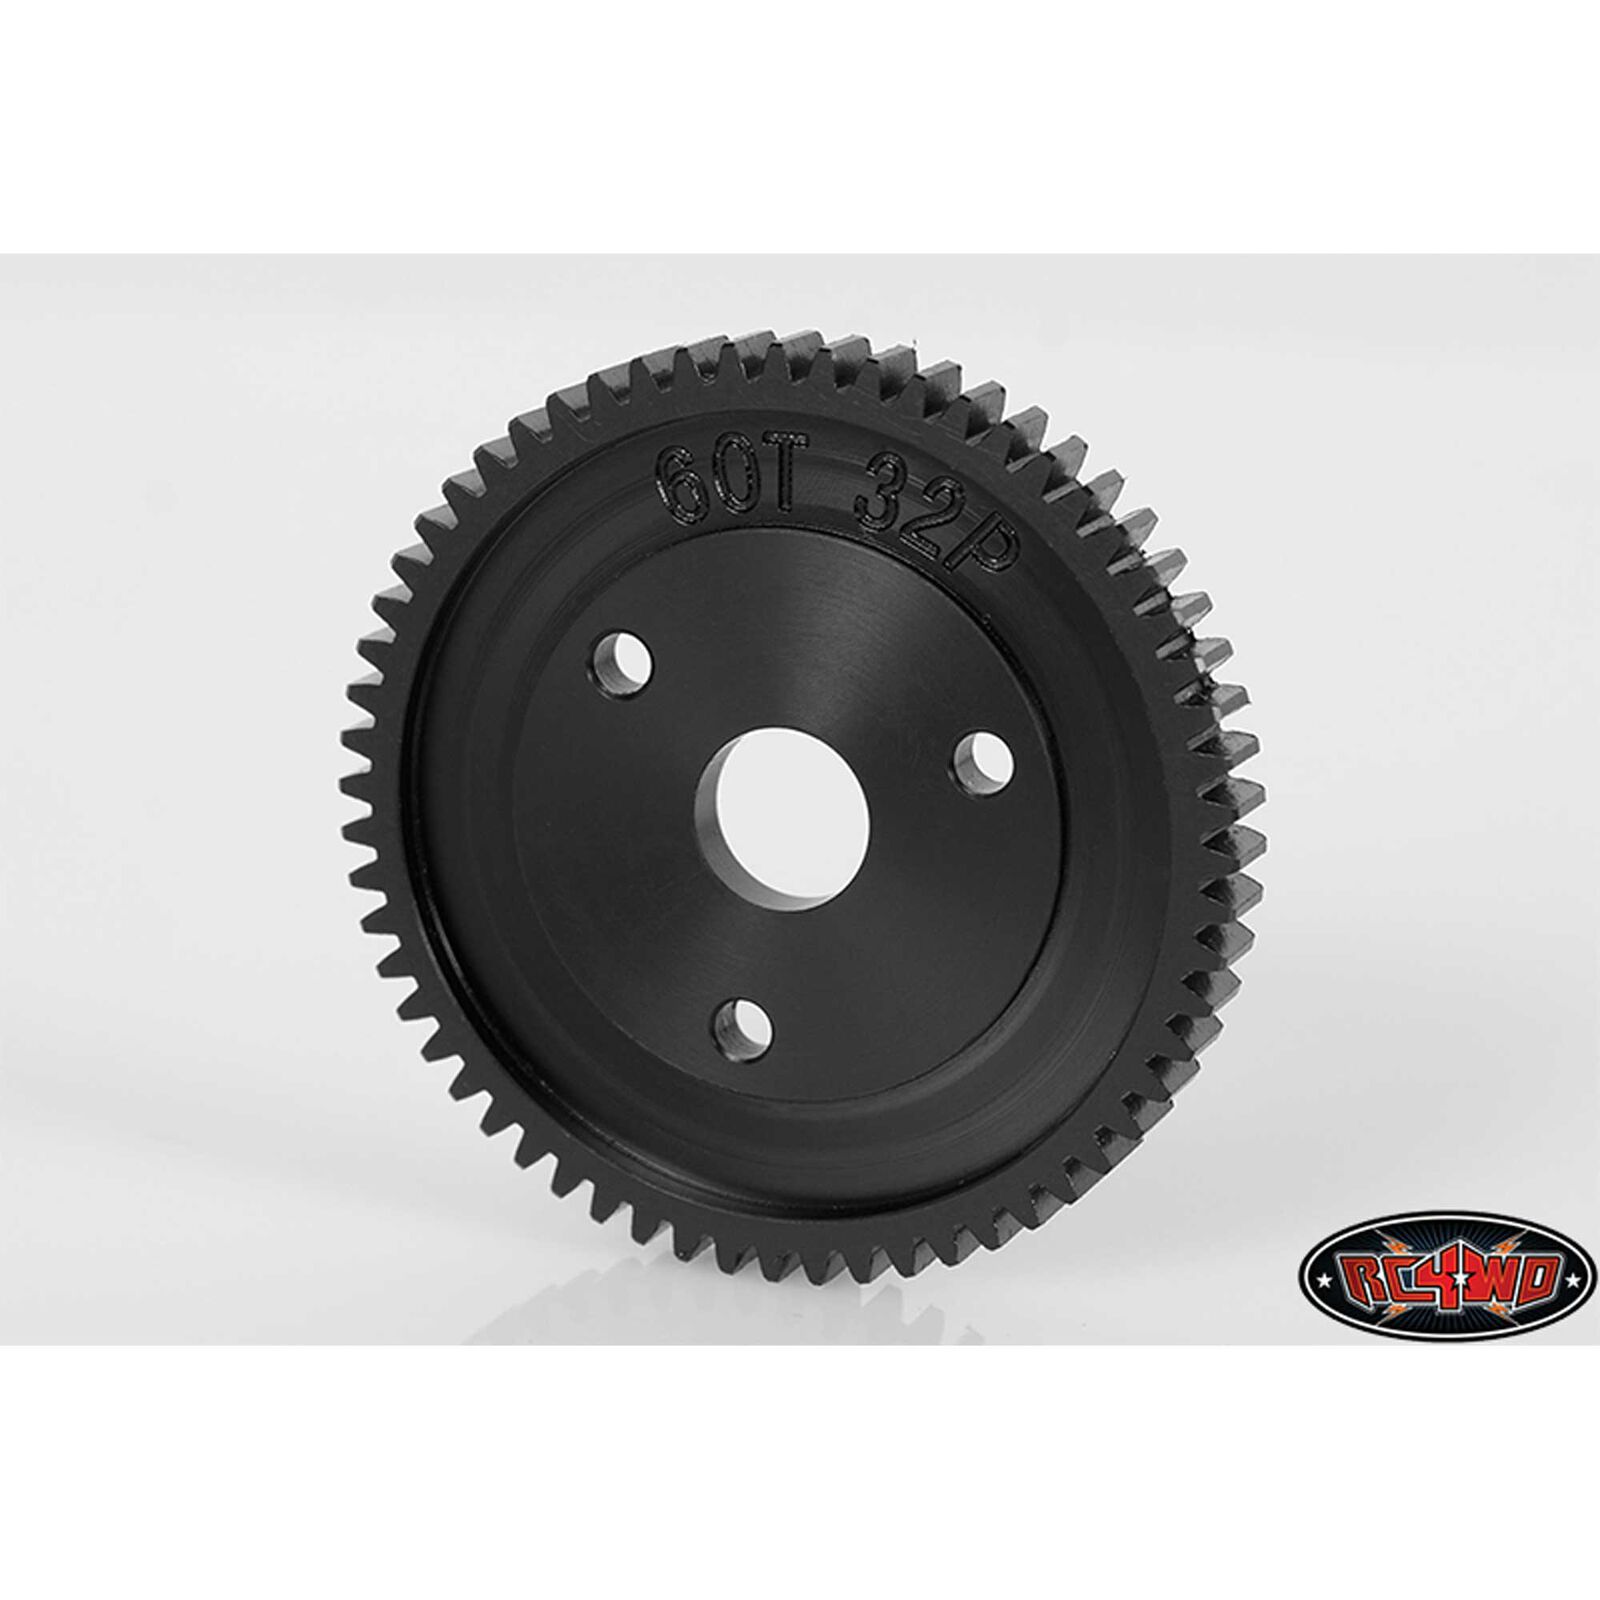 60t Delrin Spur Gear  AX2 2 Speed Transmission